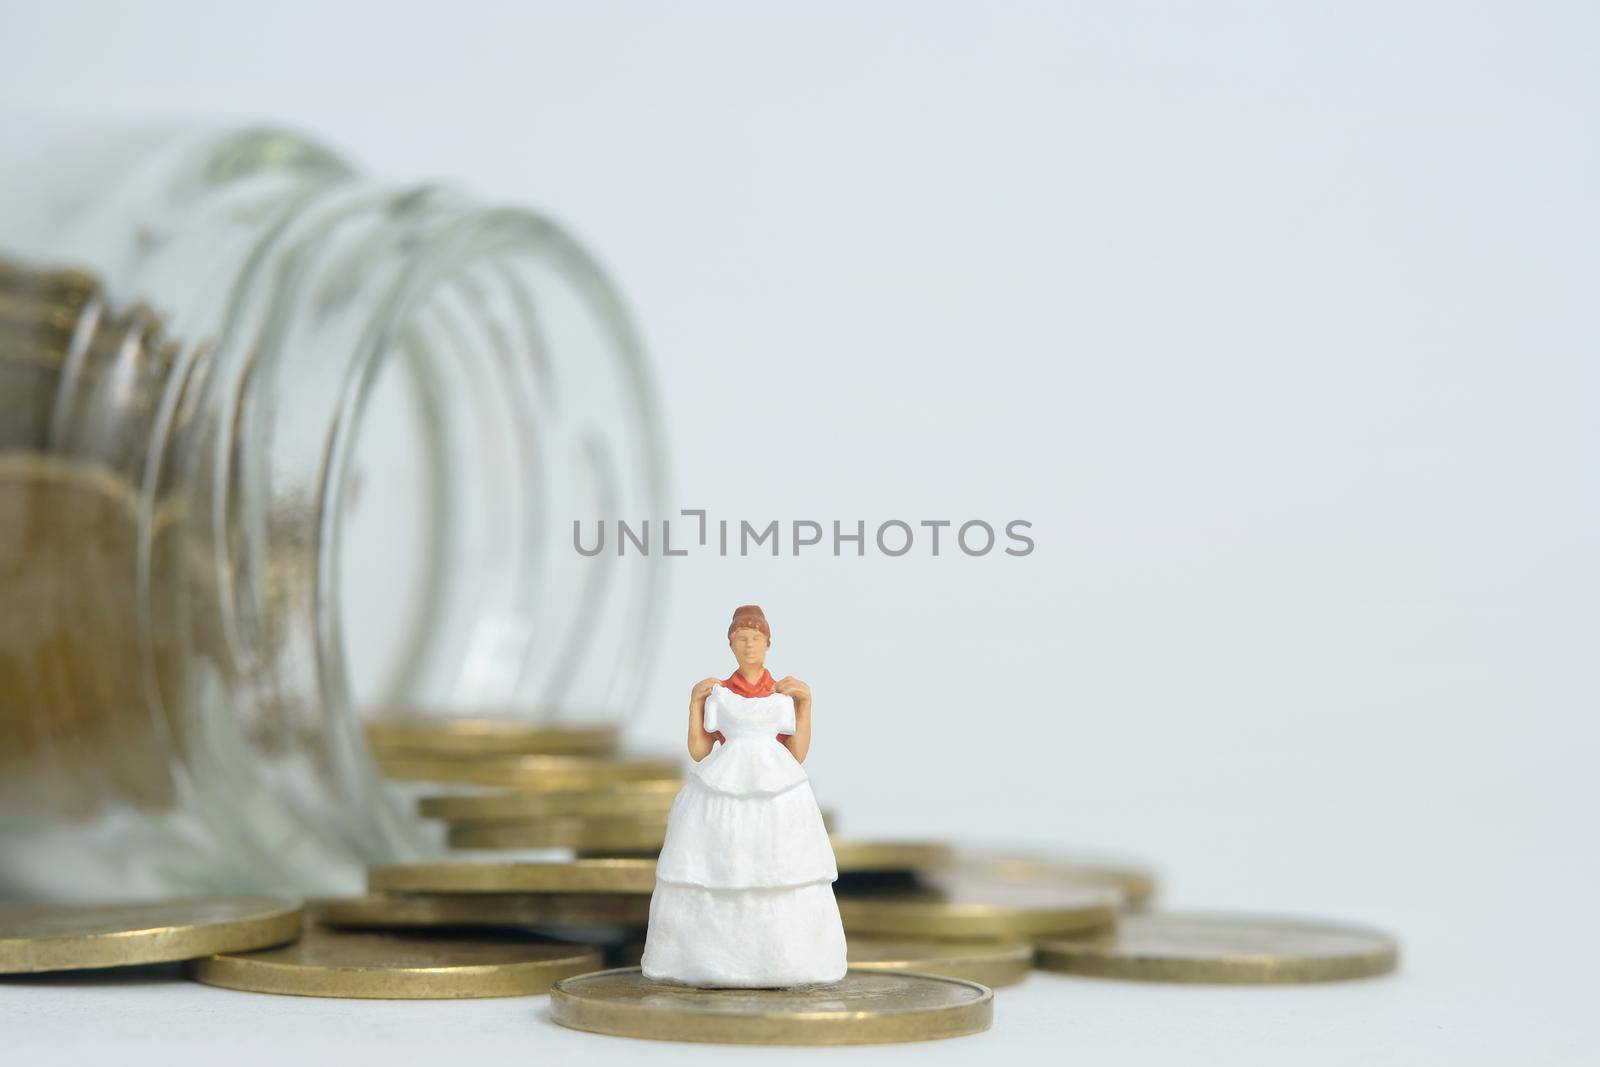 Wedding dress budget for bride, miniature people illustration concept. Woman standing above coin money jar. Image photo by Macrostud